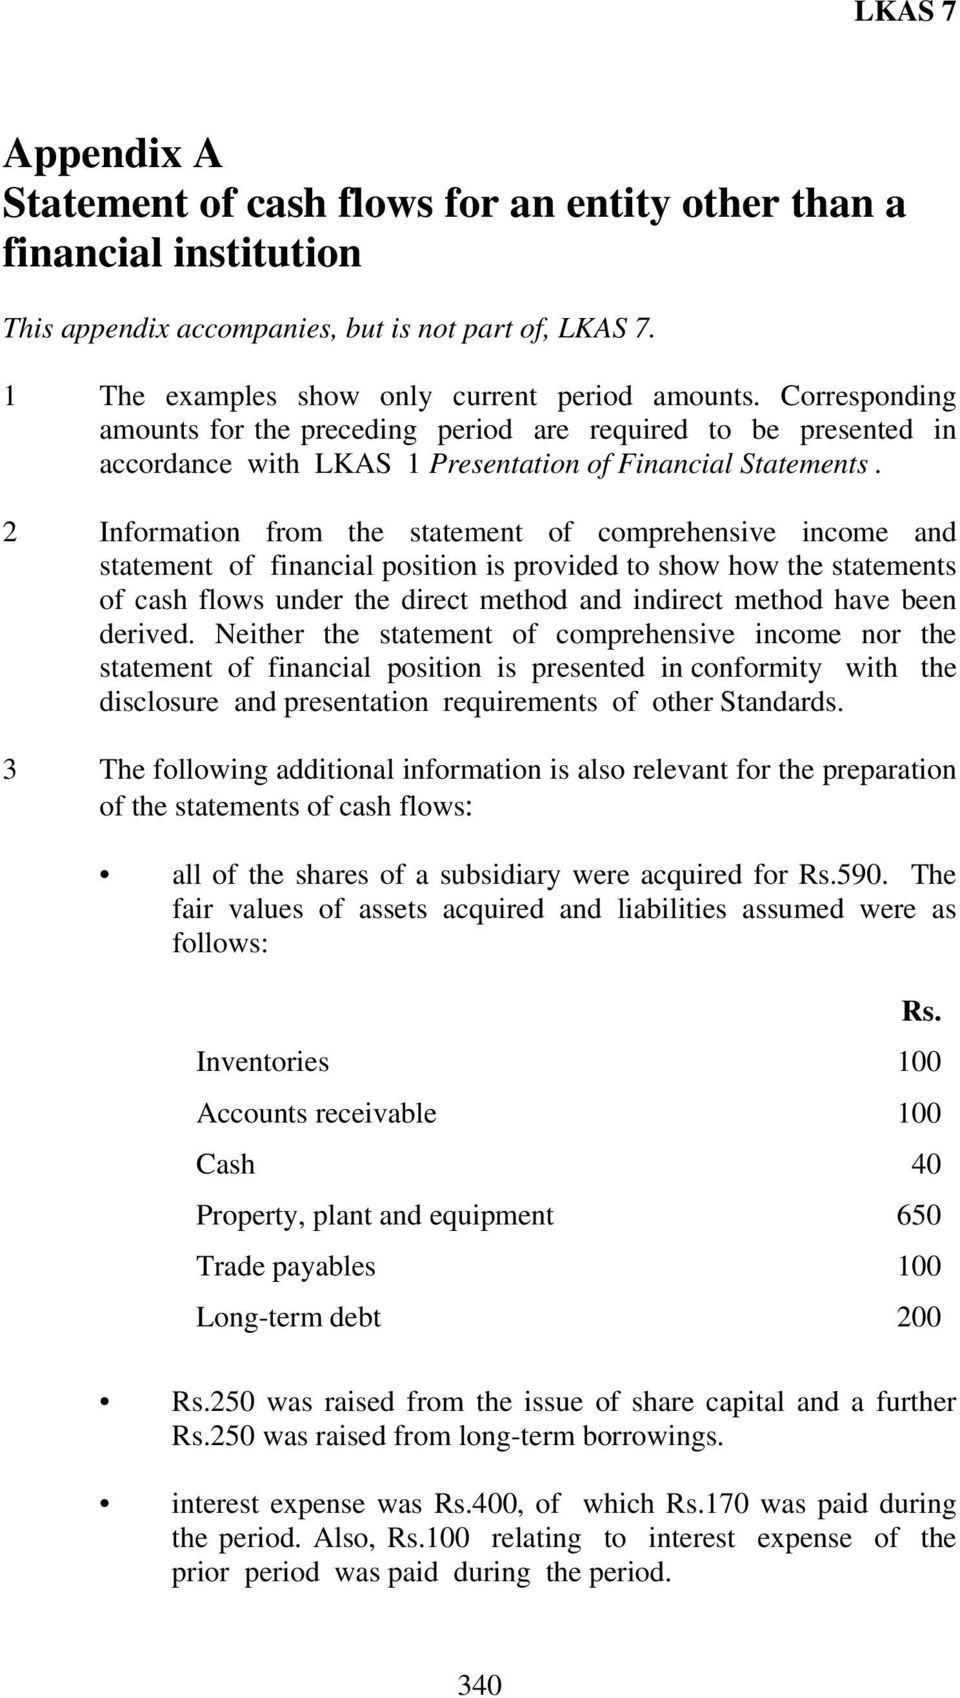 2 Information from the statement of comprehensive income and statement of financial position is provided to show how the statements of cash flows under the direct method and indirect method have been